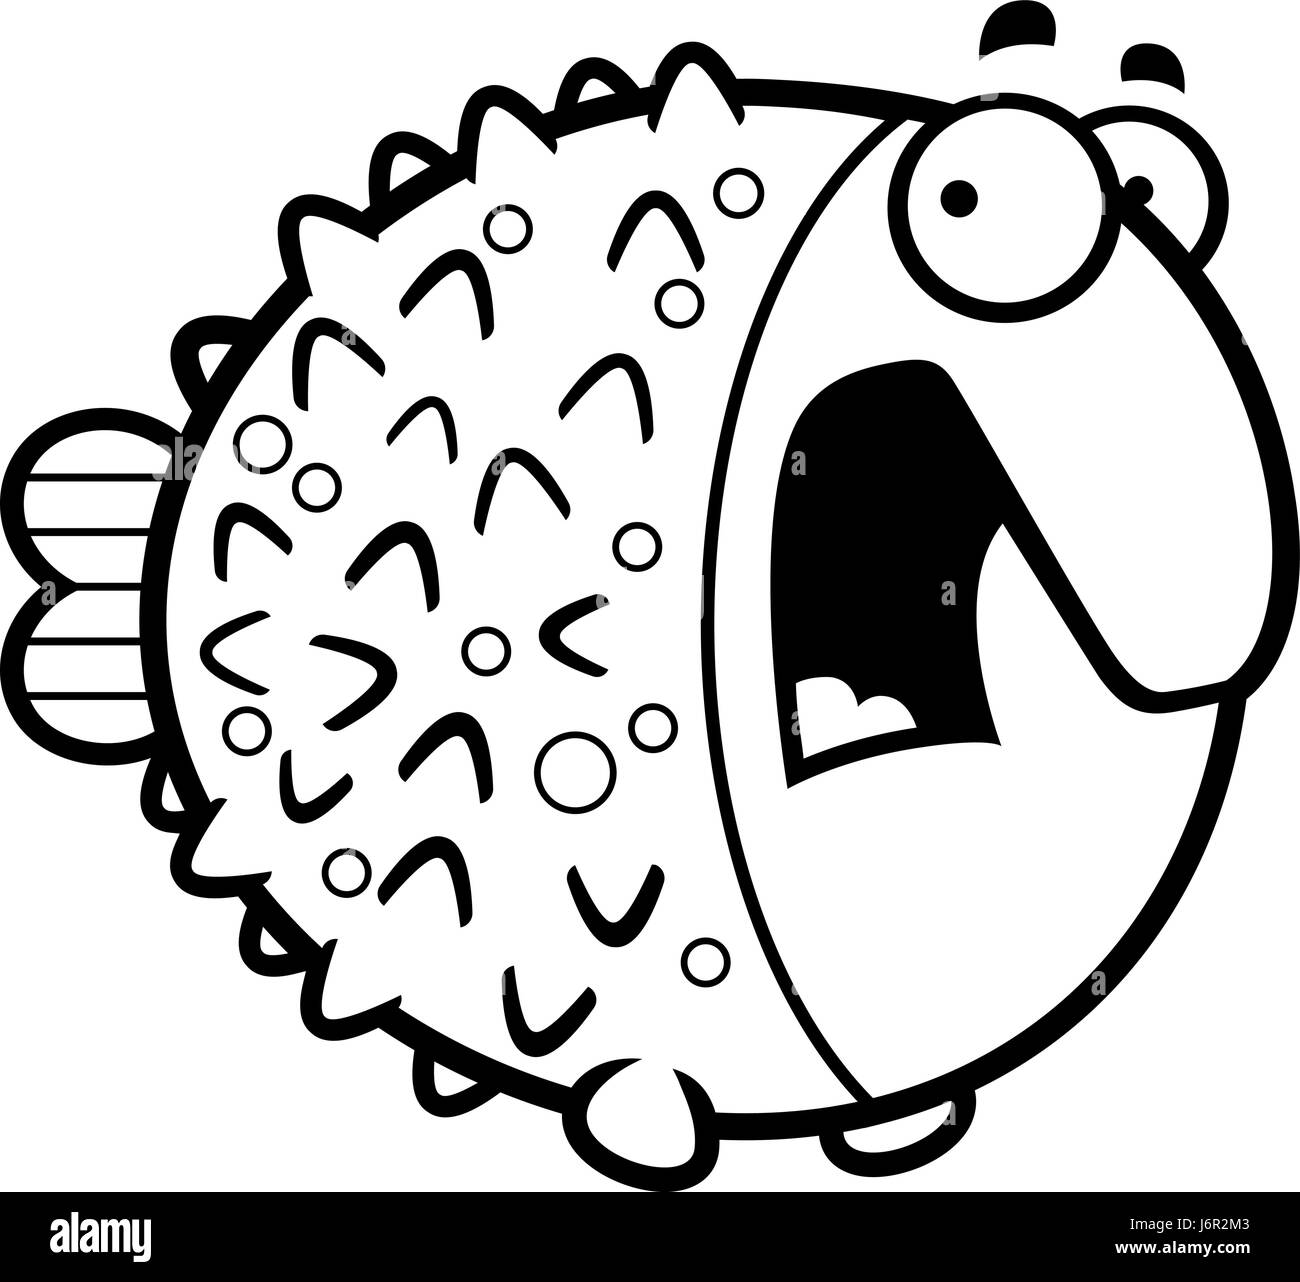 A cartoon illustration of a pufferfish looking scared. Stock Vector